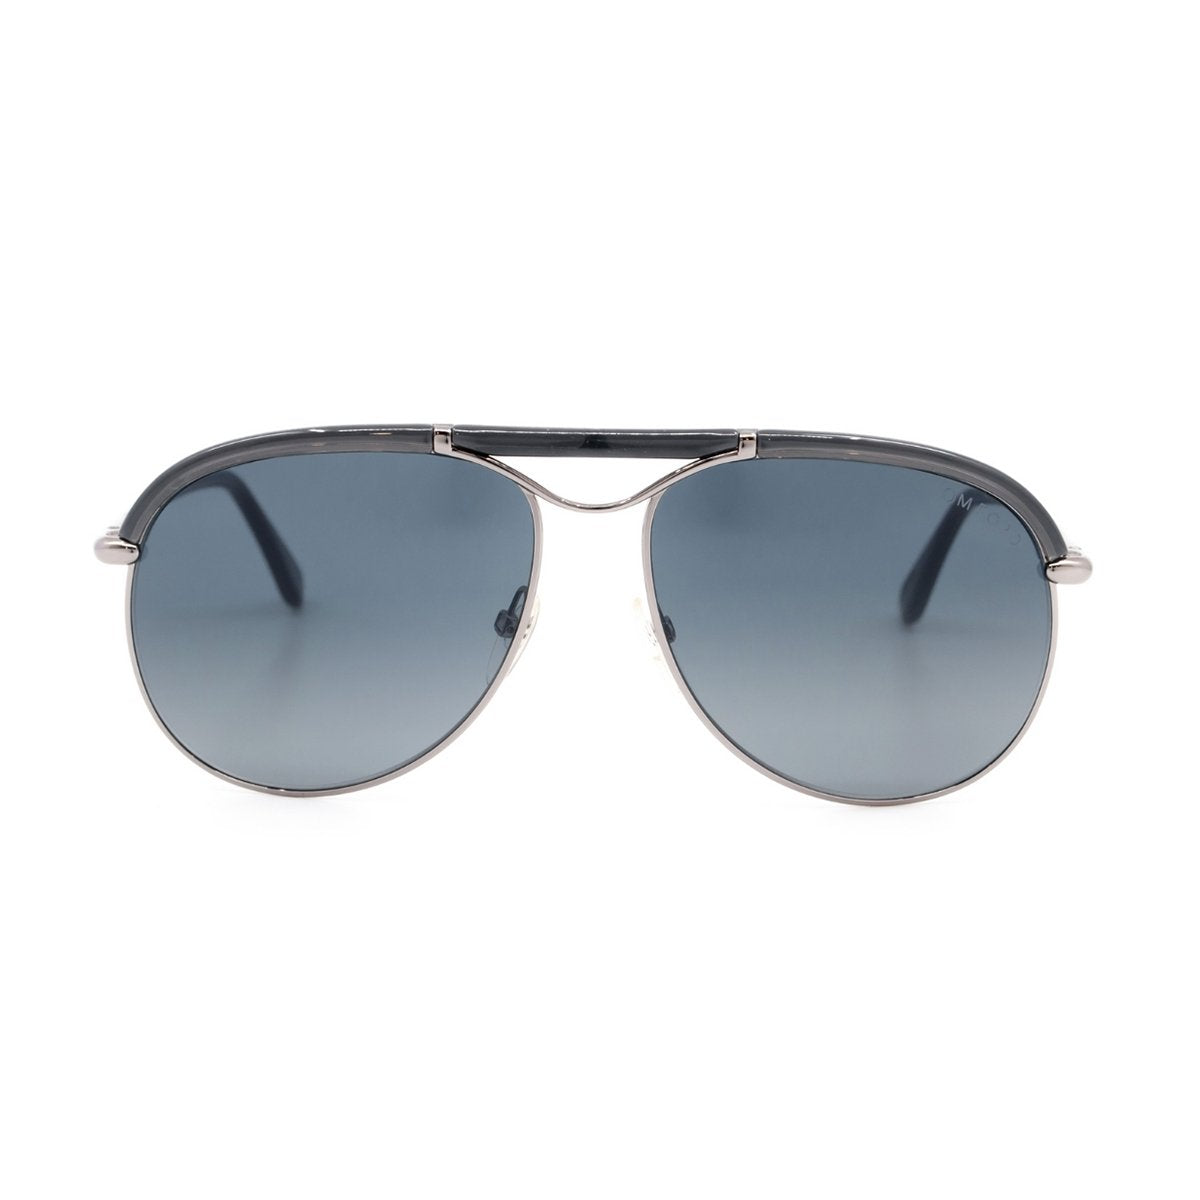 Load image into Gallery viewer, TOM FORD TF235 MARCO 12A Sunglasses
